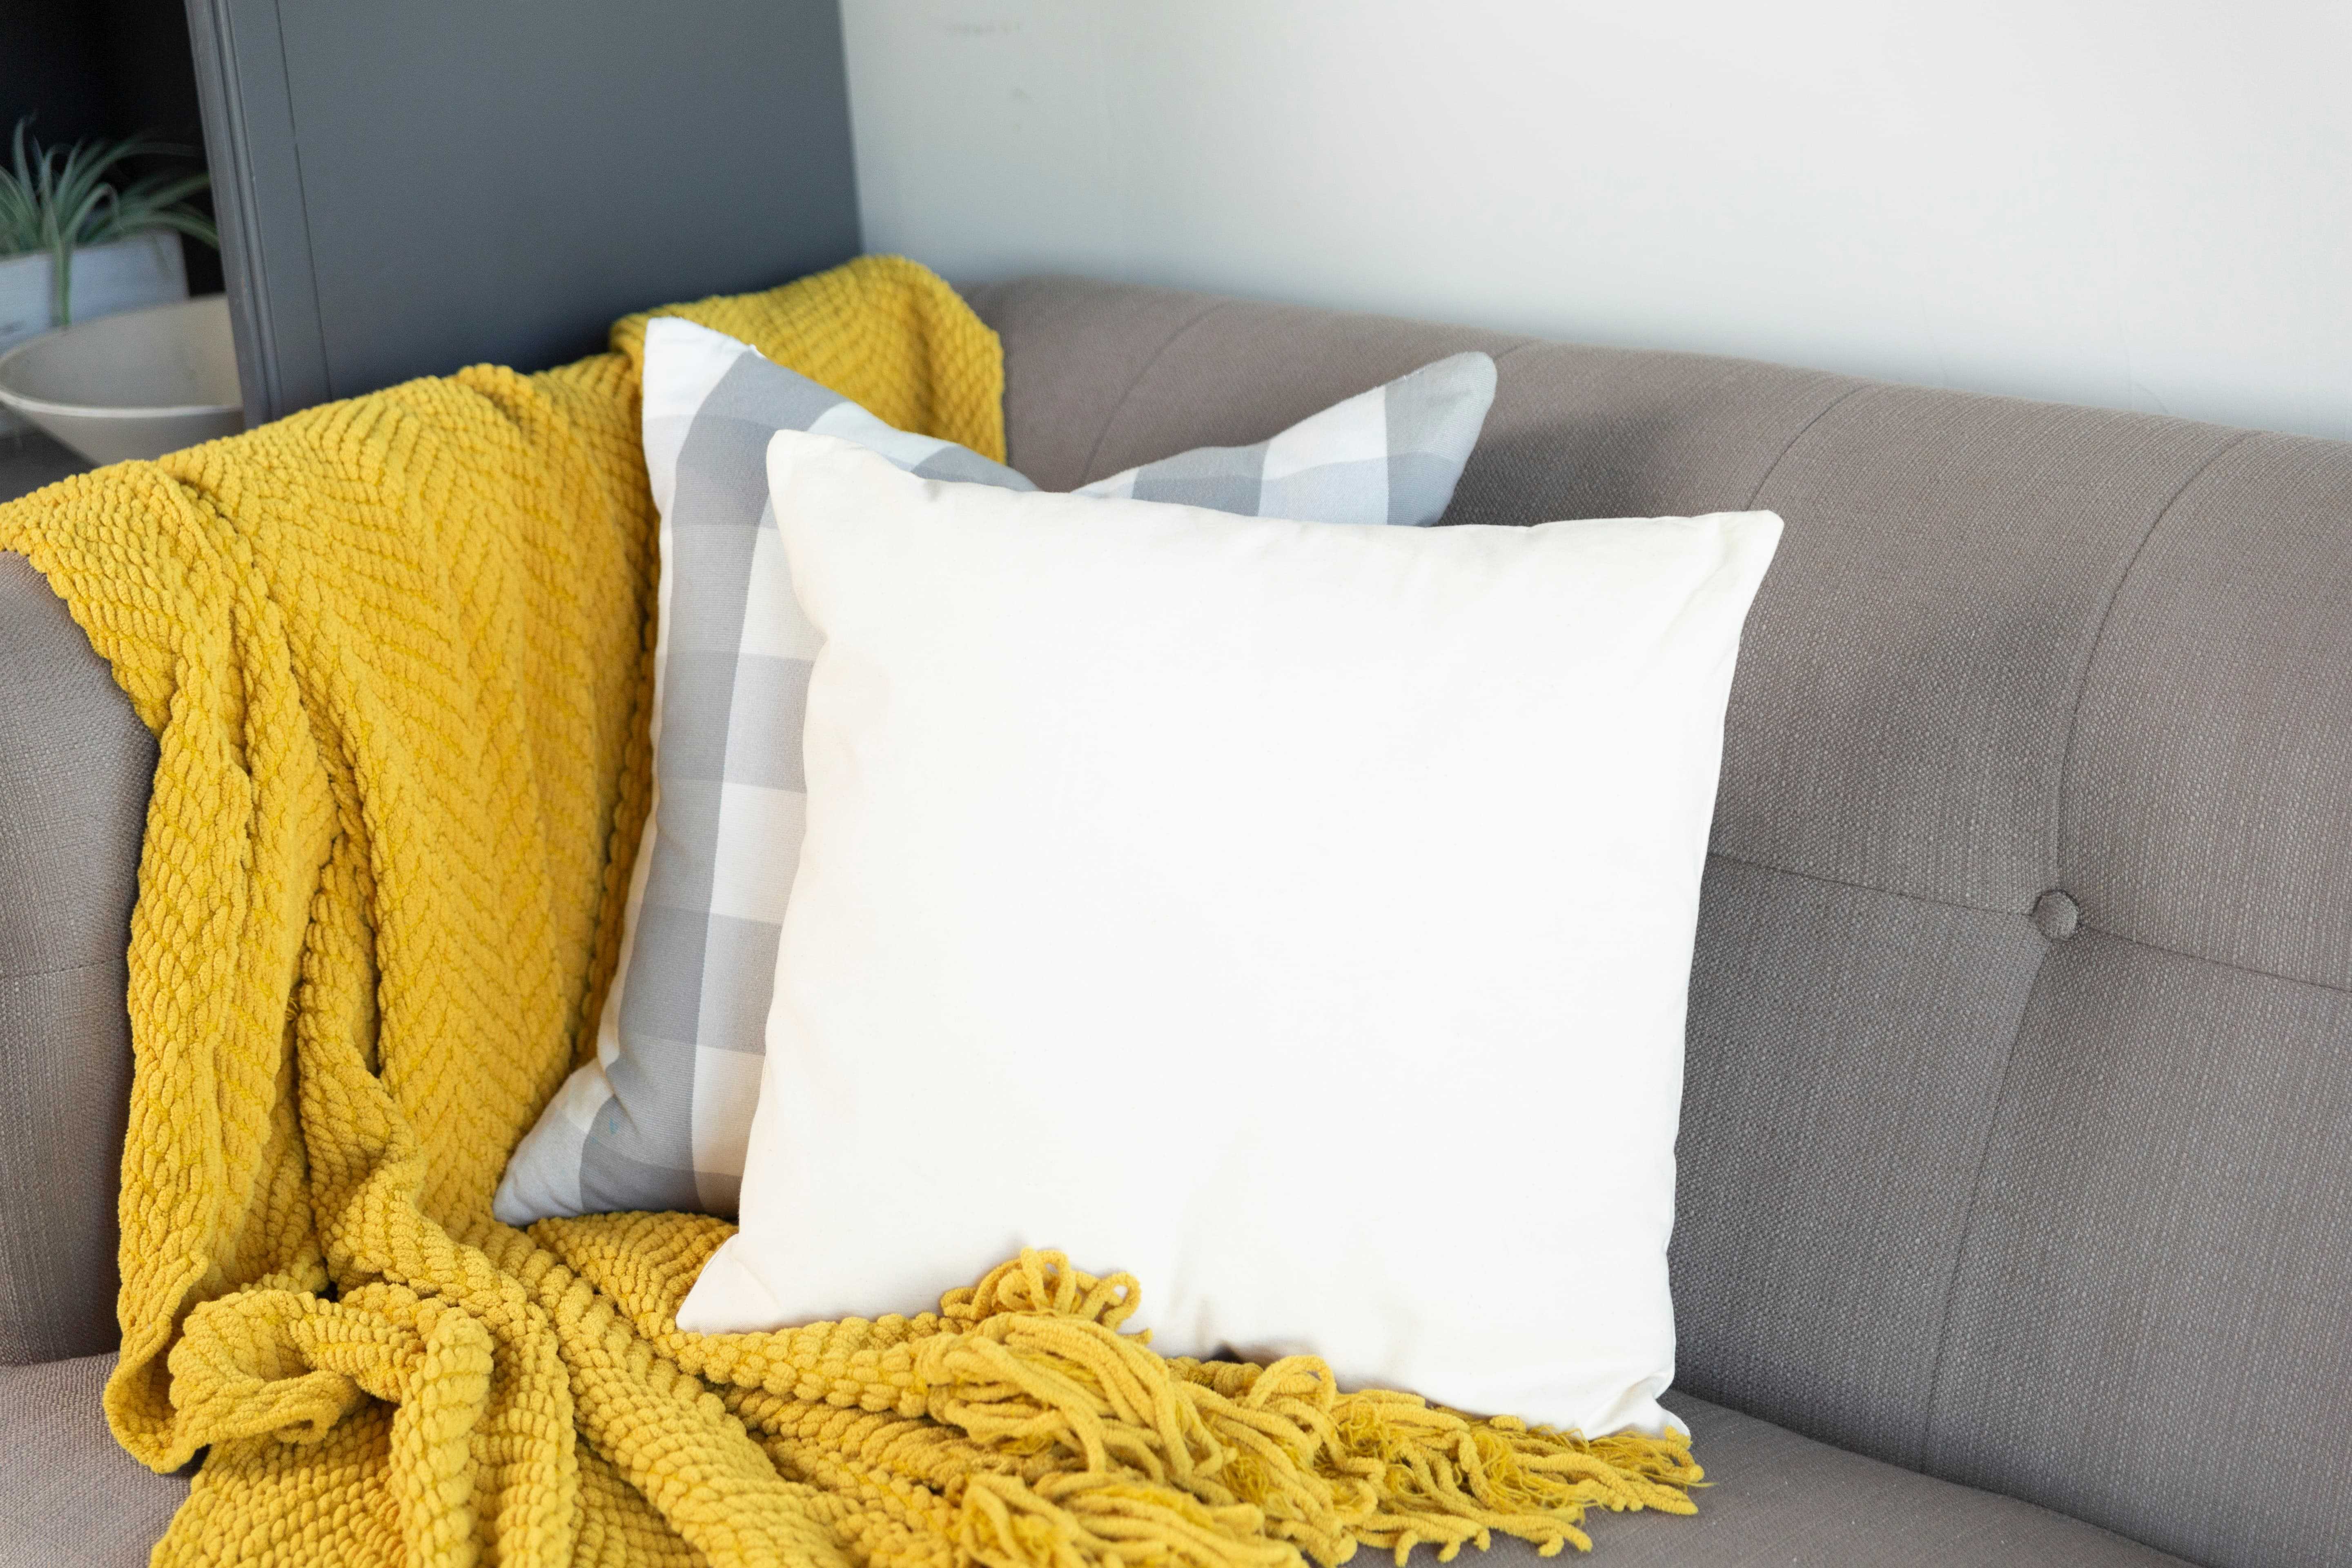 white pillow and yellow blanket on a gray couch